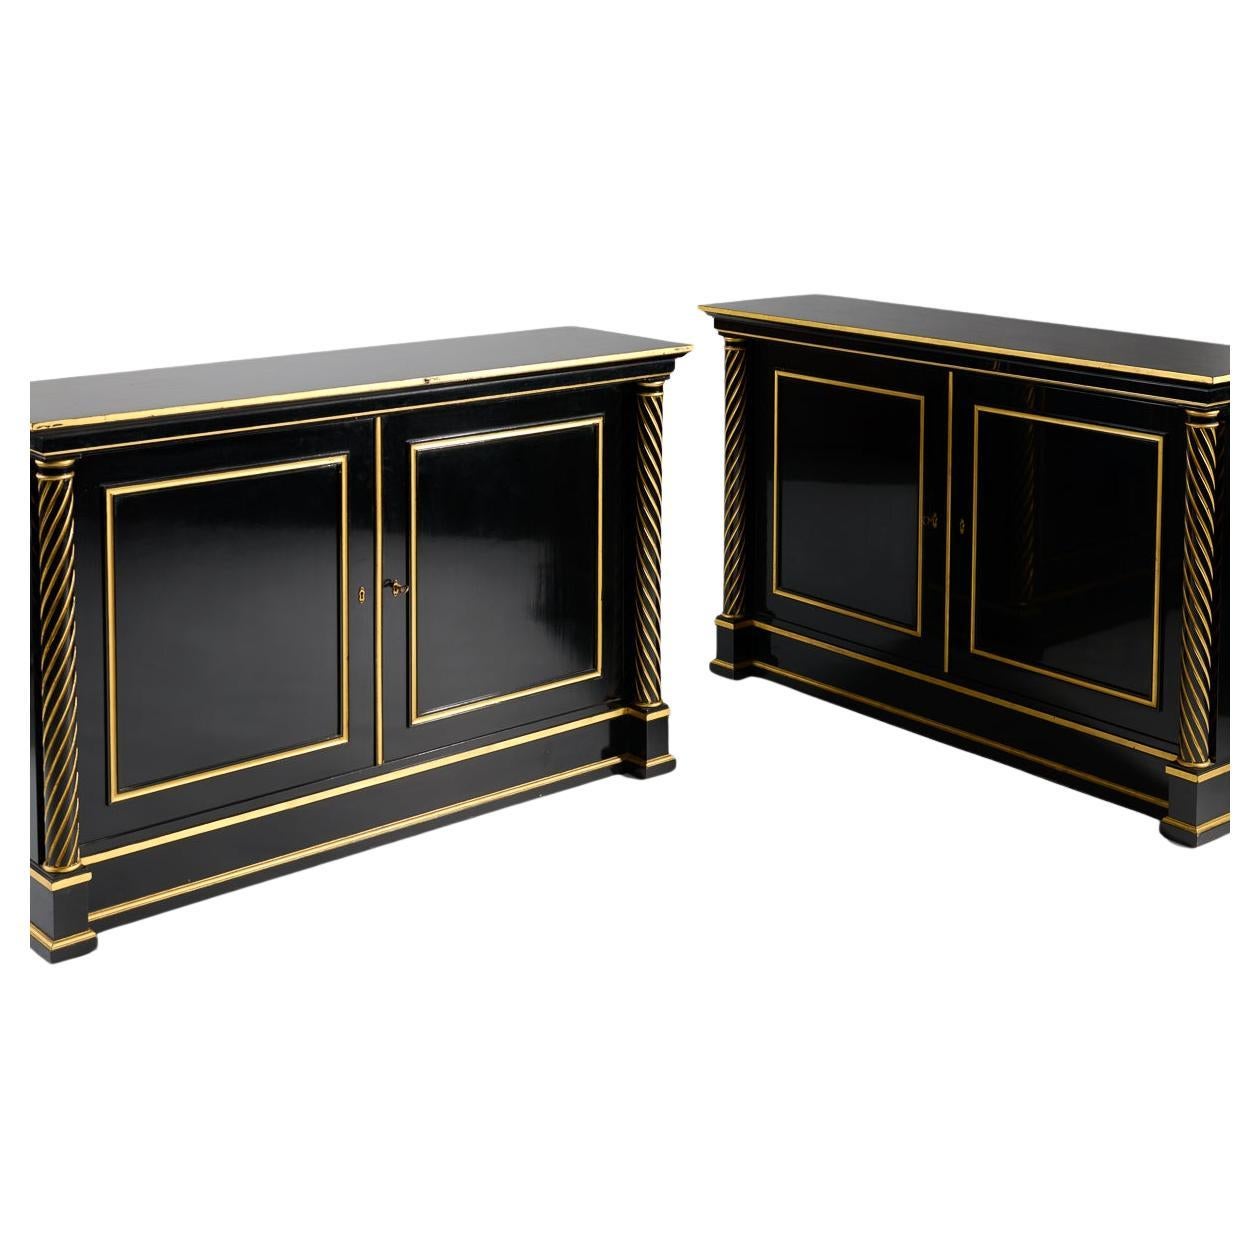 Twin columns of twisted gilt wood form the vertical borders of this gracefully symmetrical, black lacquered, double door cabinet.

Provenance:
In 1965 Maison Jansen decorated a Paris apartment in the 8th arrondissement, and when the clients retired